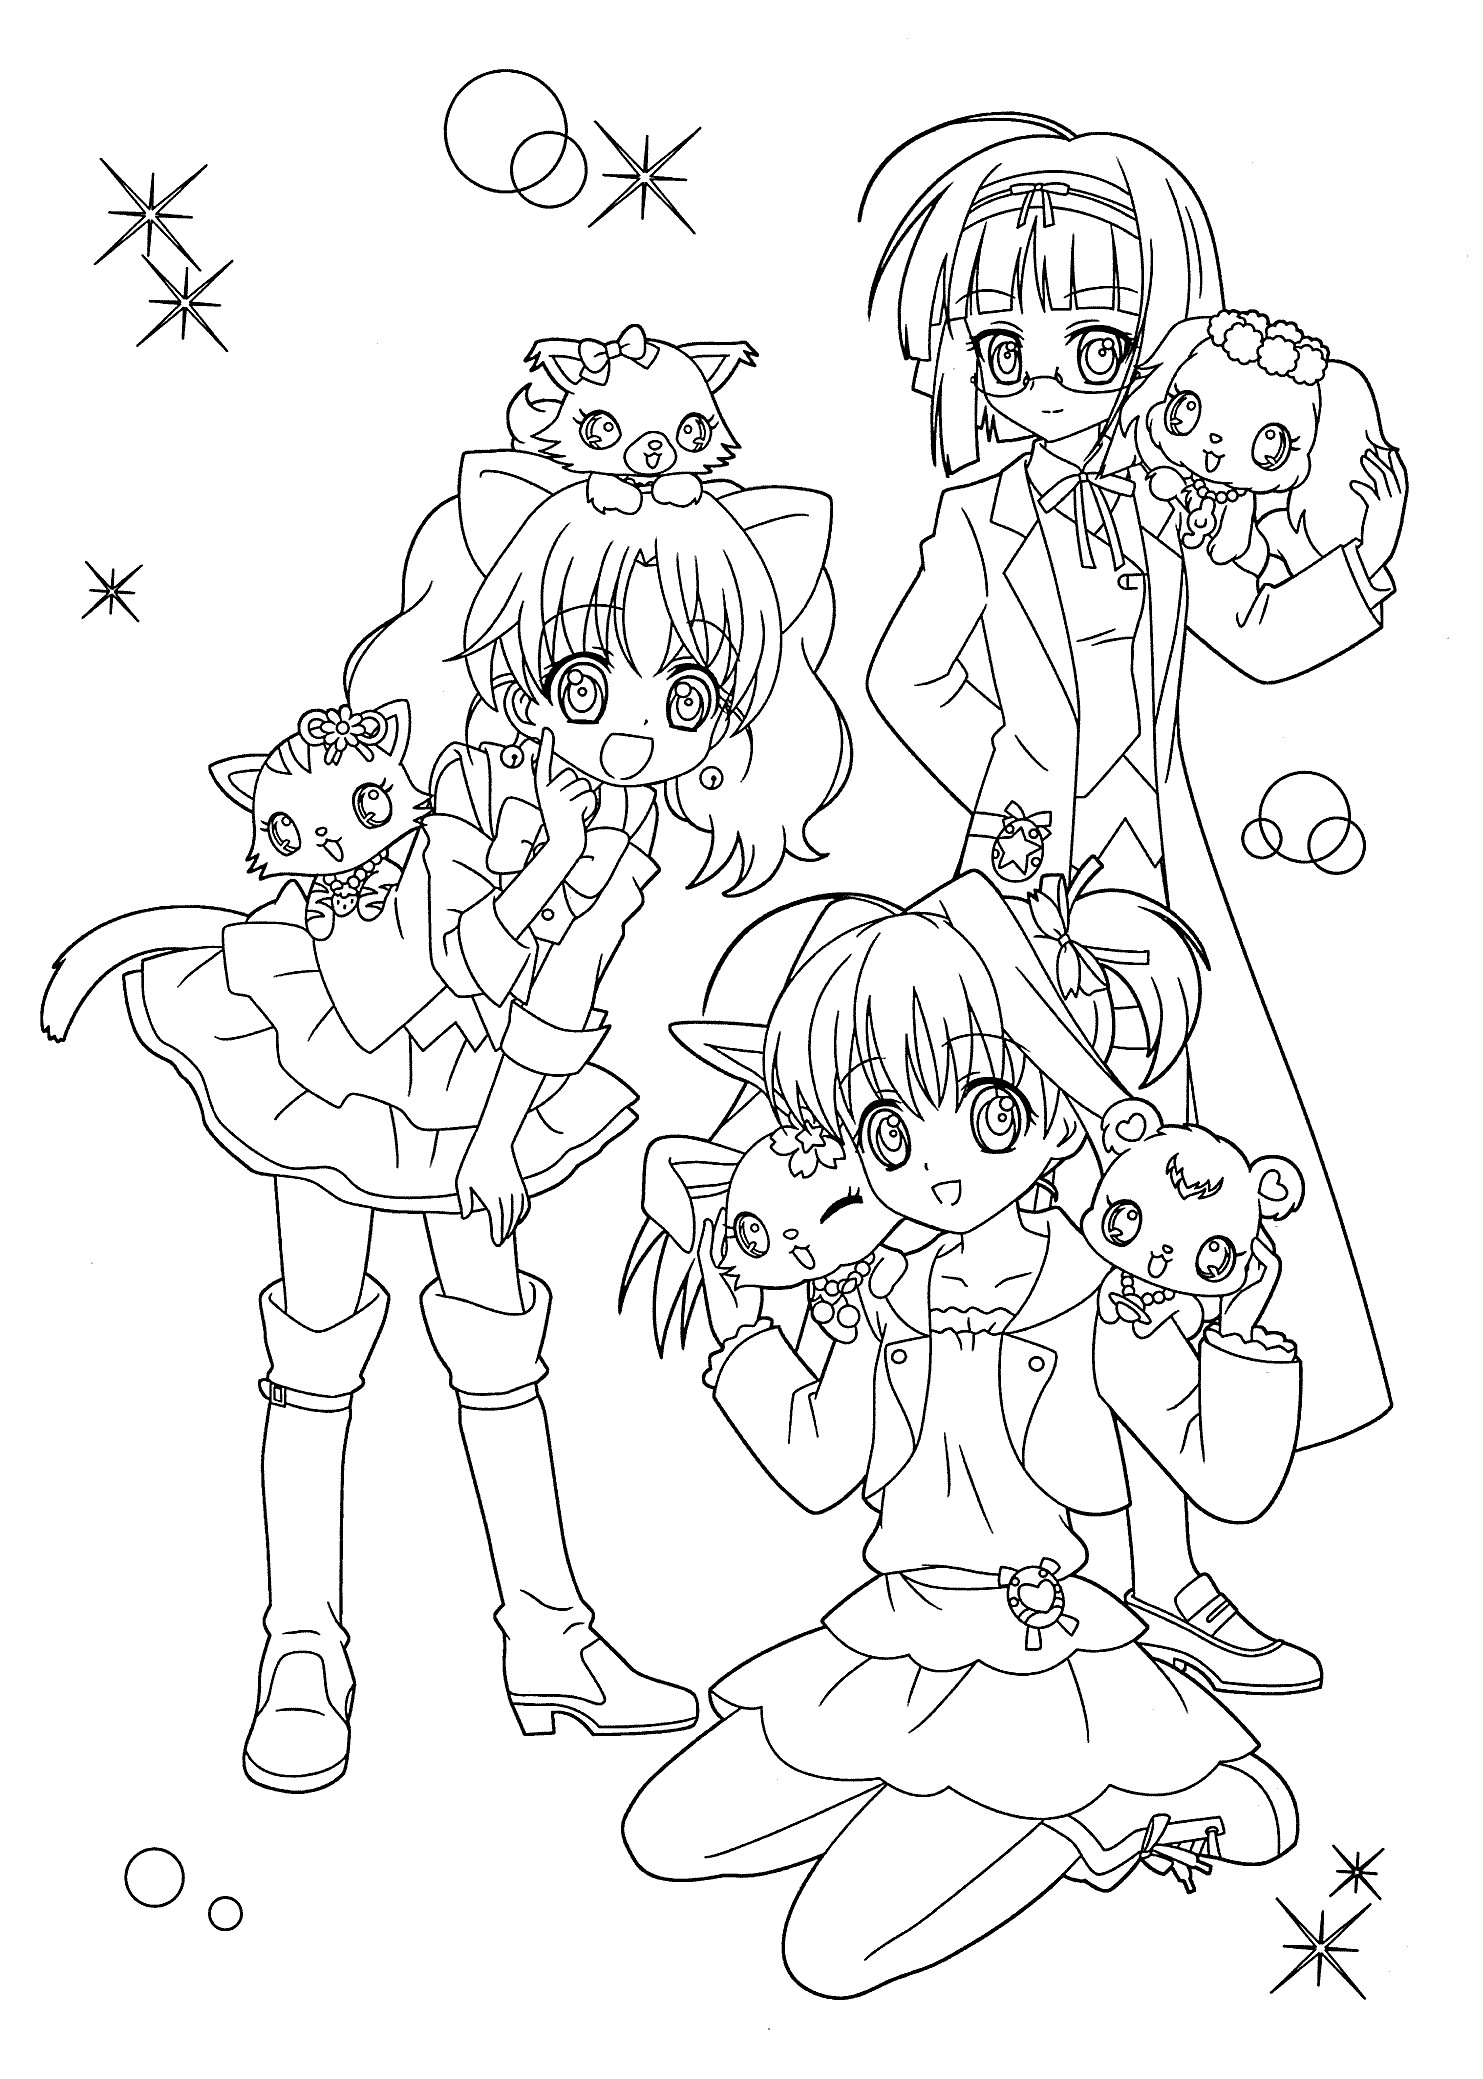 Cute Anime Girls Coloring Pages
 Pin en Colorings